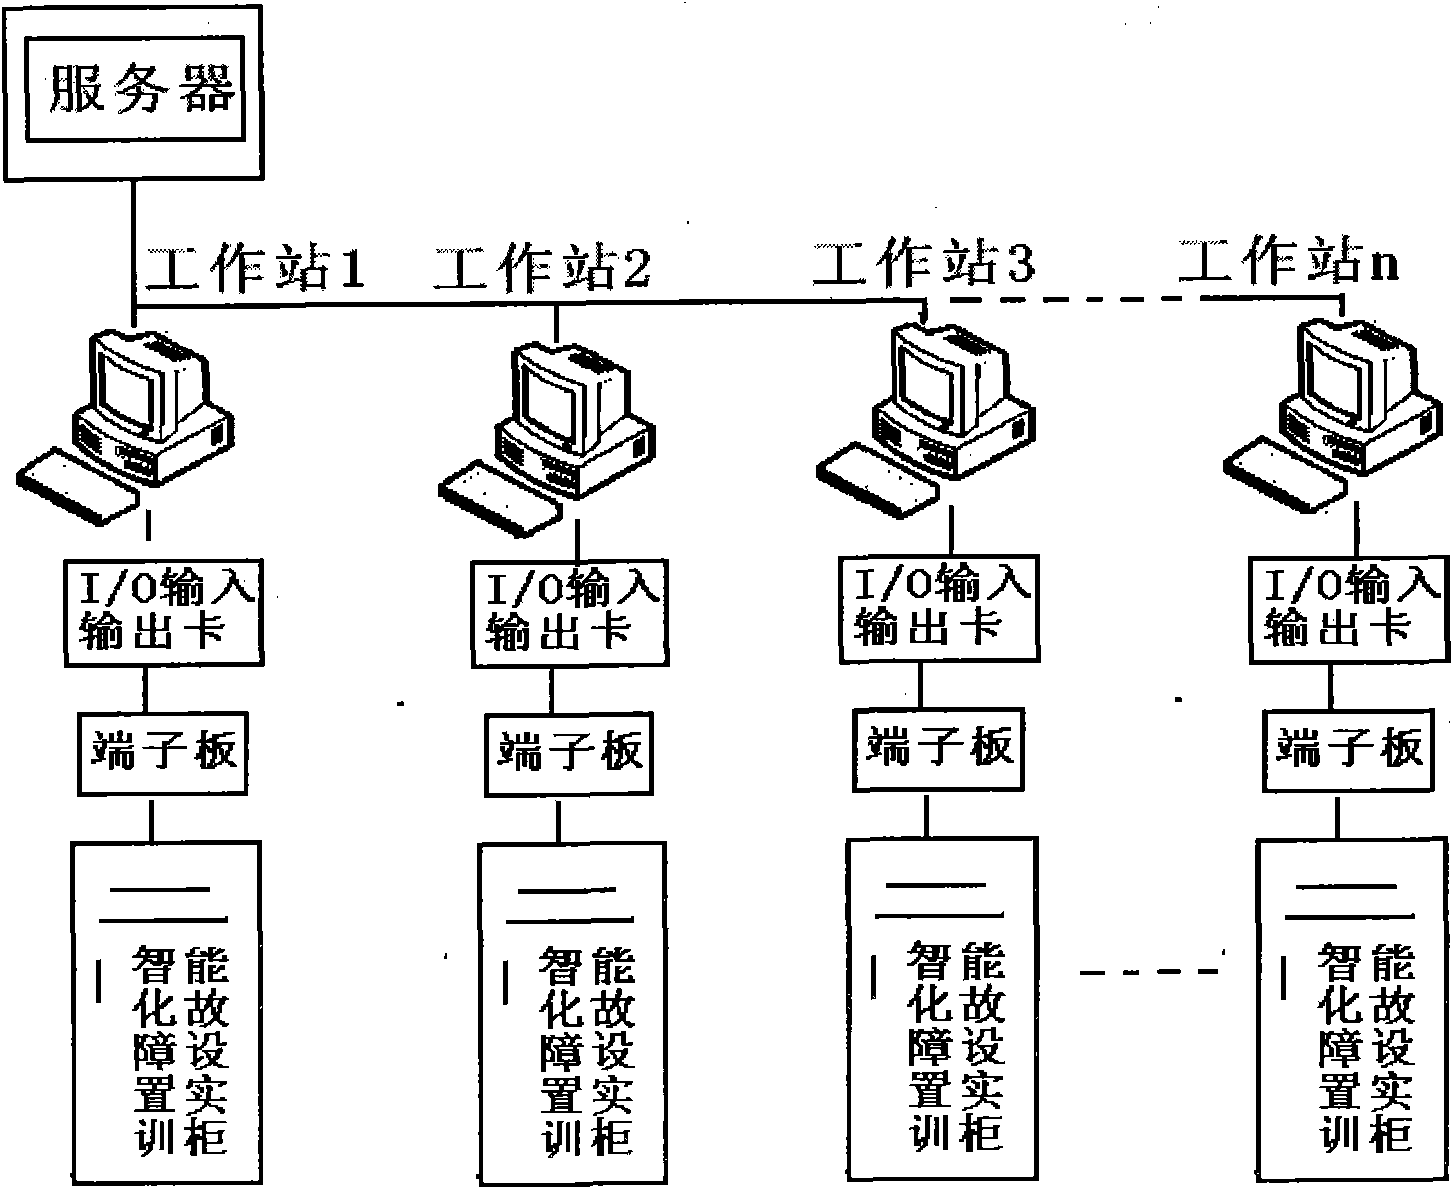 Computer-aided overhaul simulation system for large and medium refrigeration and air-conditioning engineering